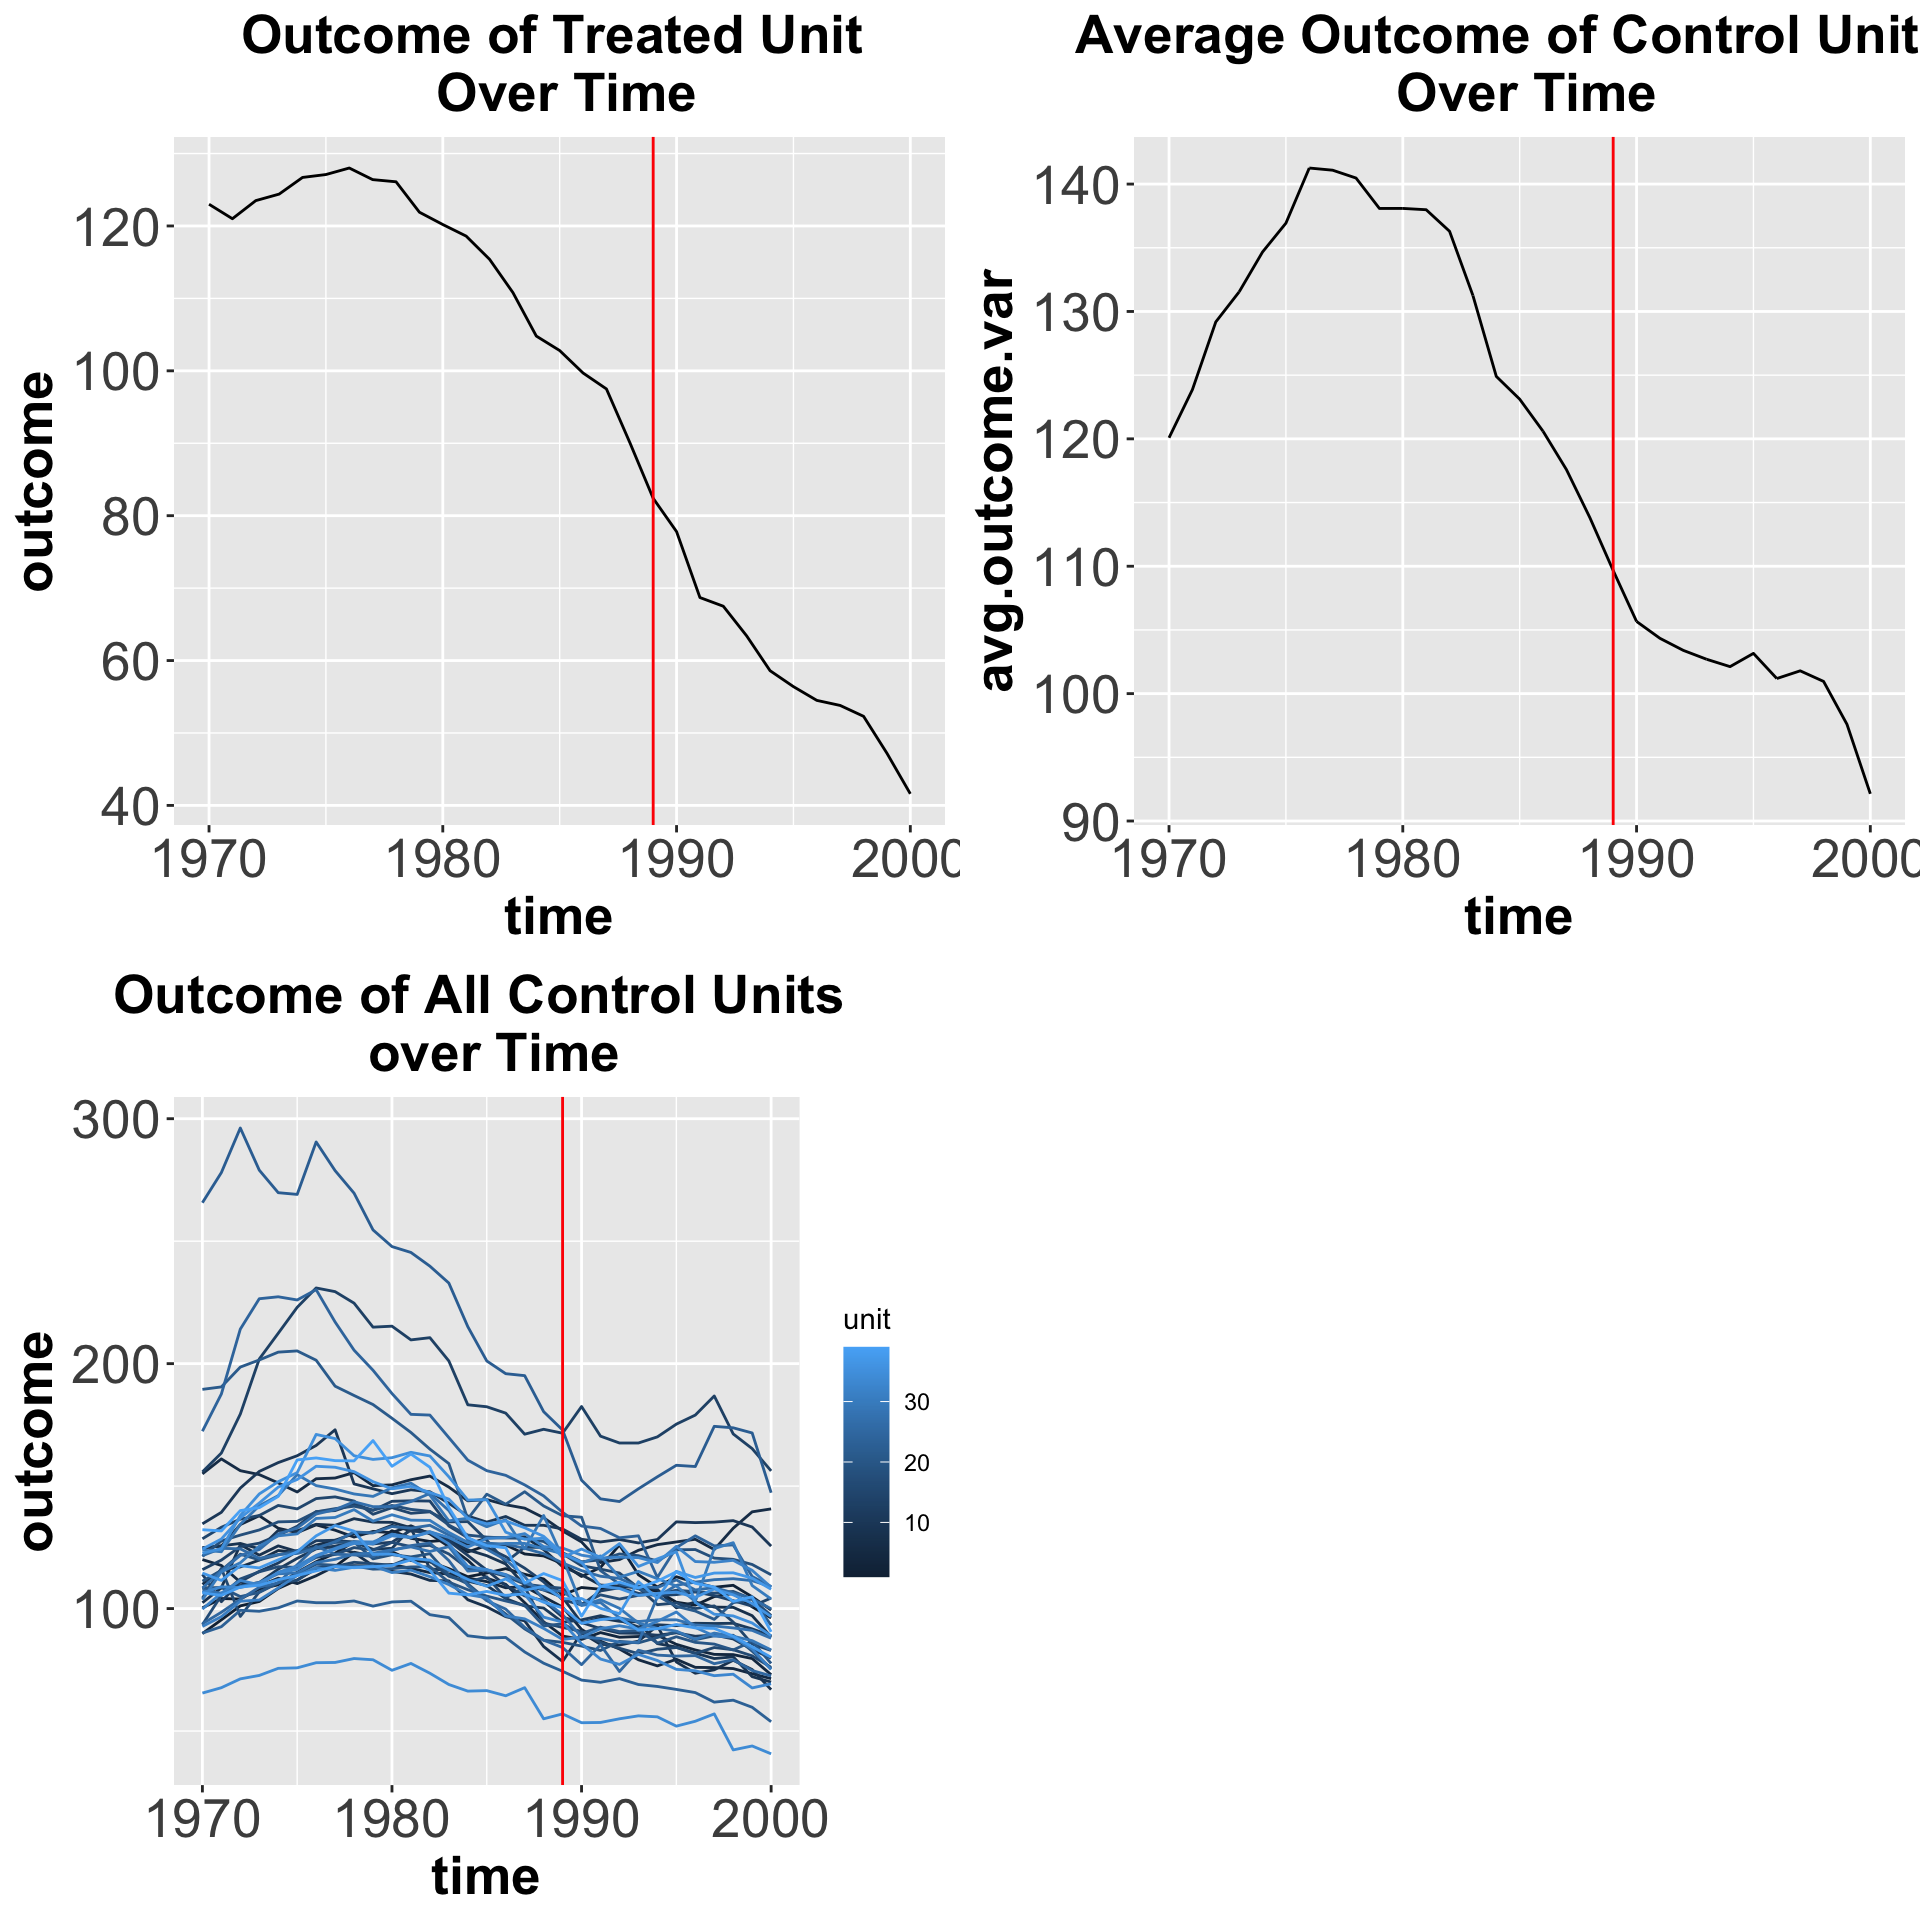 Outcome variable over time